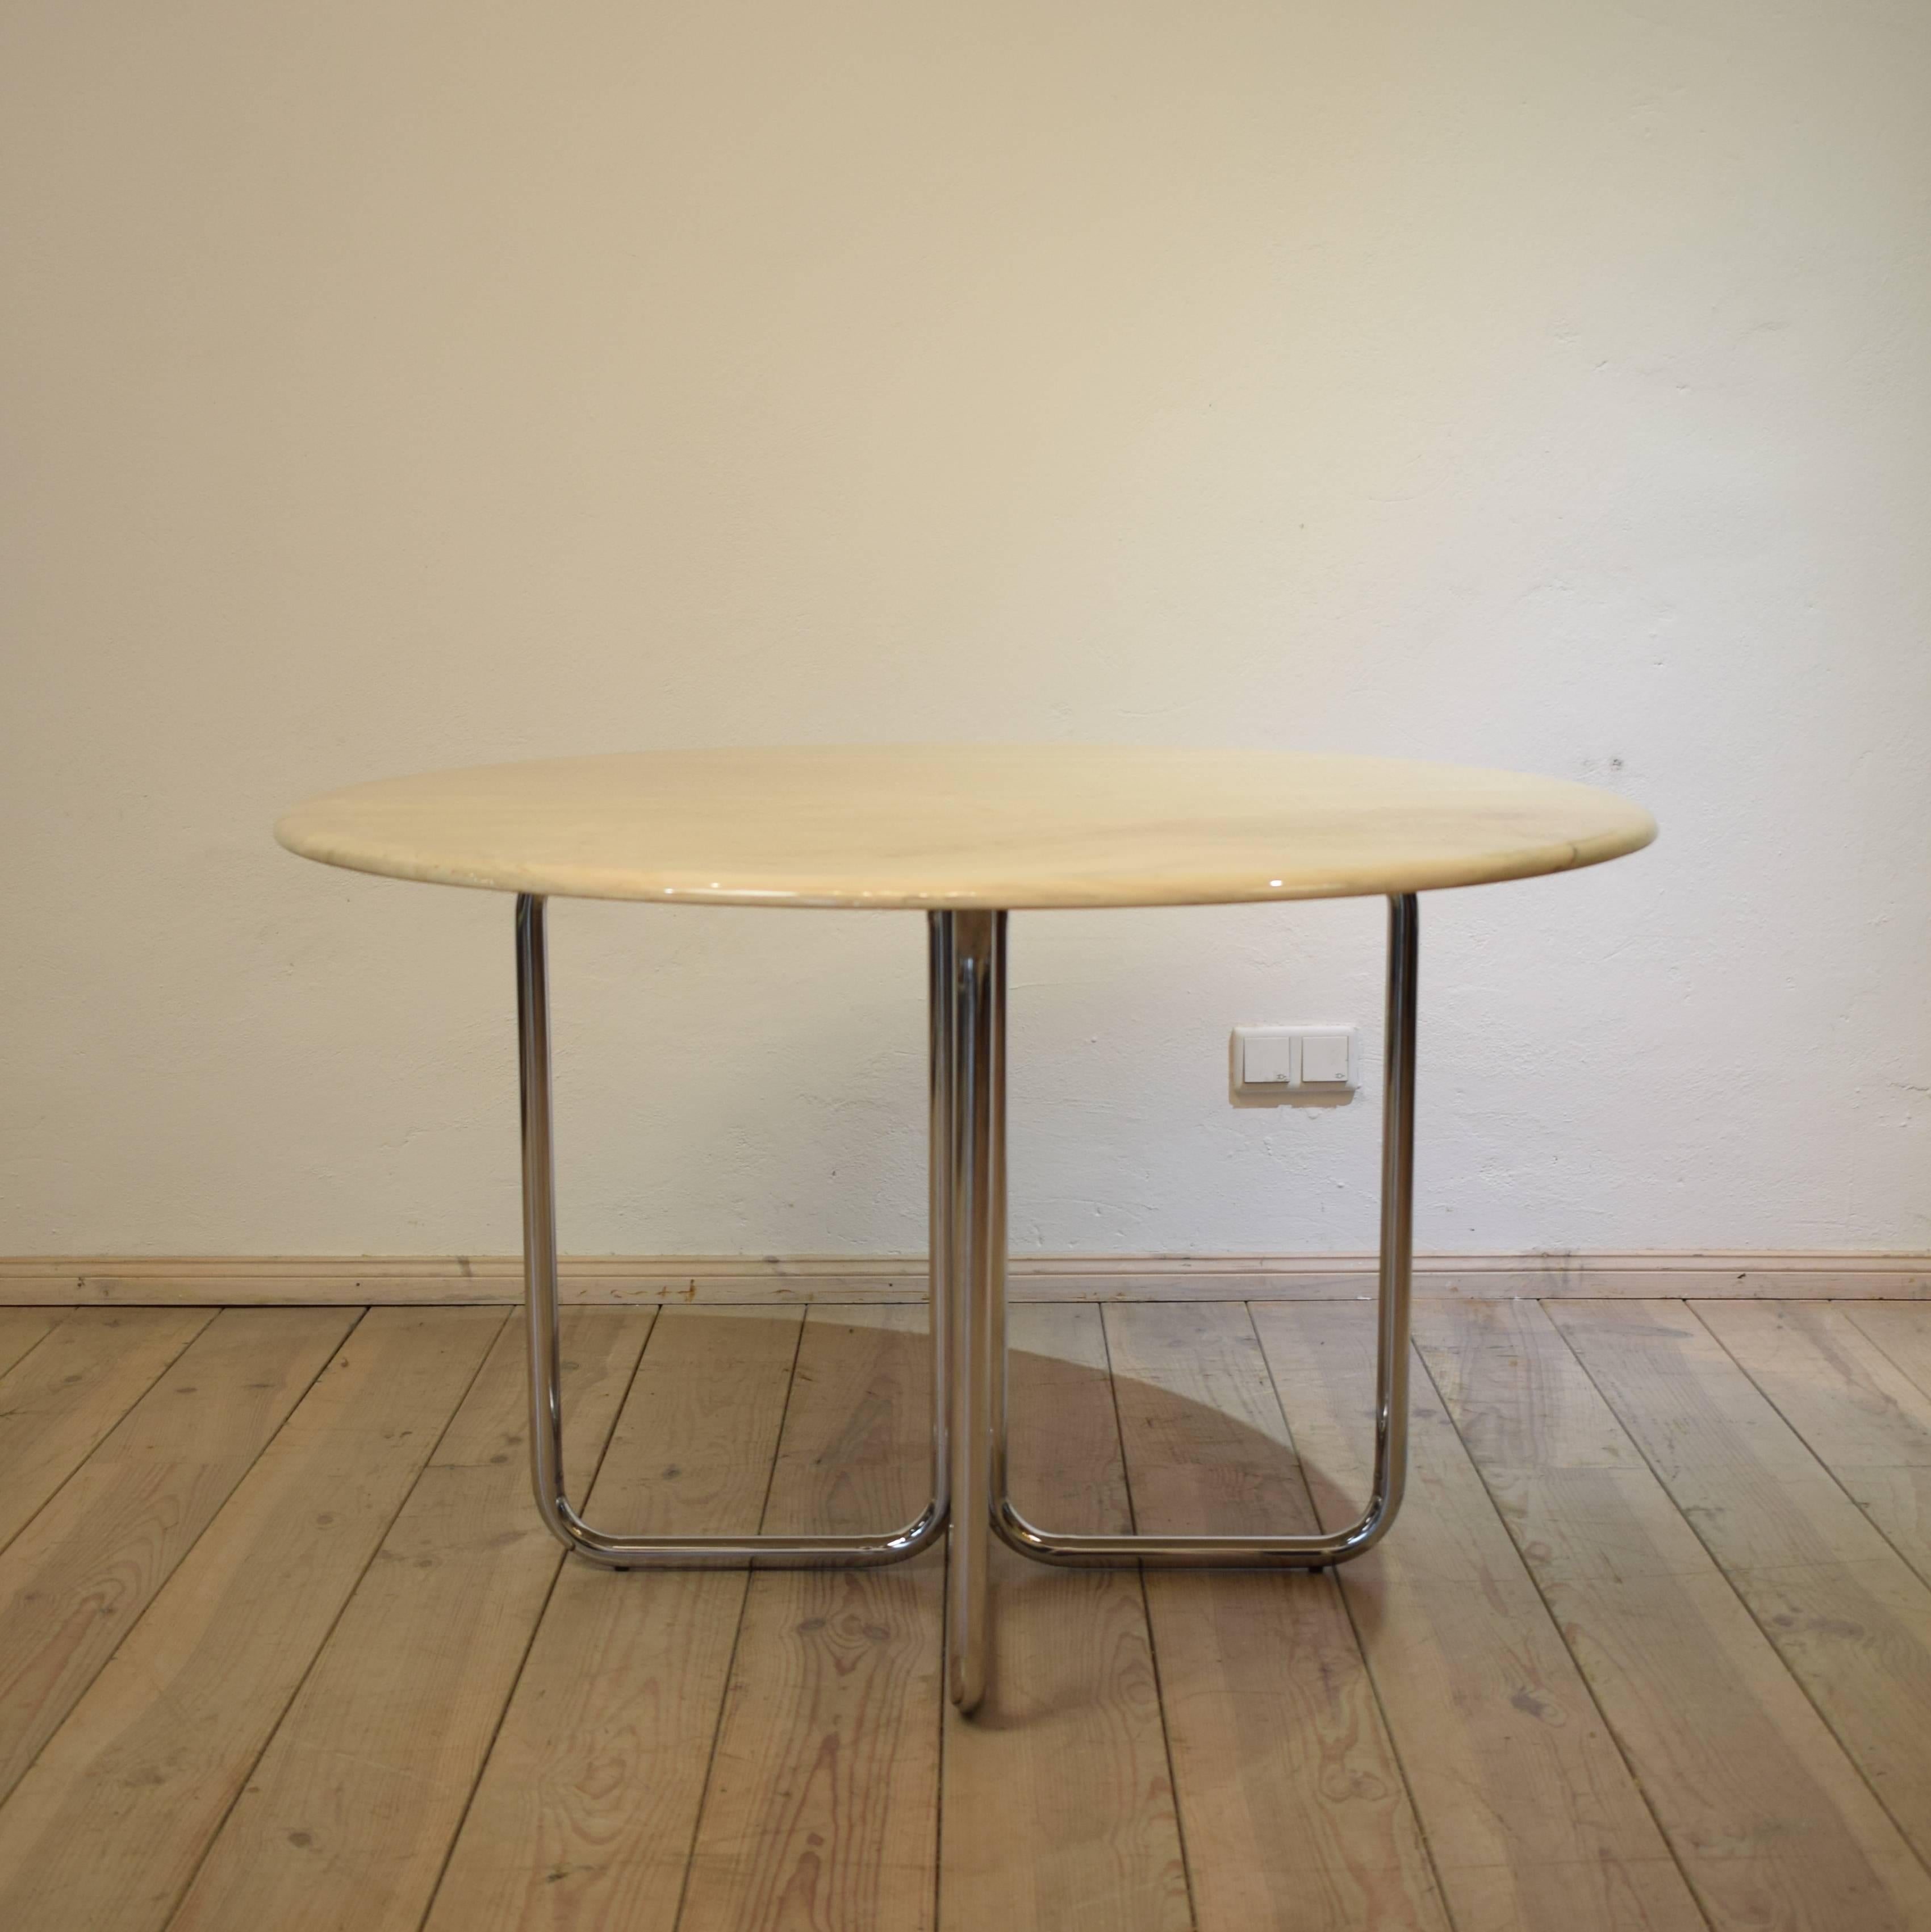 This round vintage marble dining table was produced by Tecta in the 1960s in the style of Stefan Wewerka and Marcel Breuer. The marble plate with a decorative grain sits on a simple but elegant chrome frame.